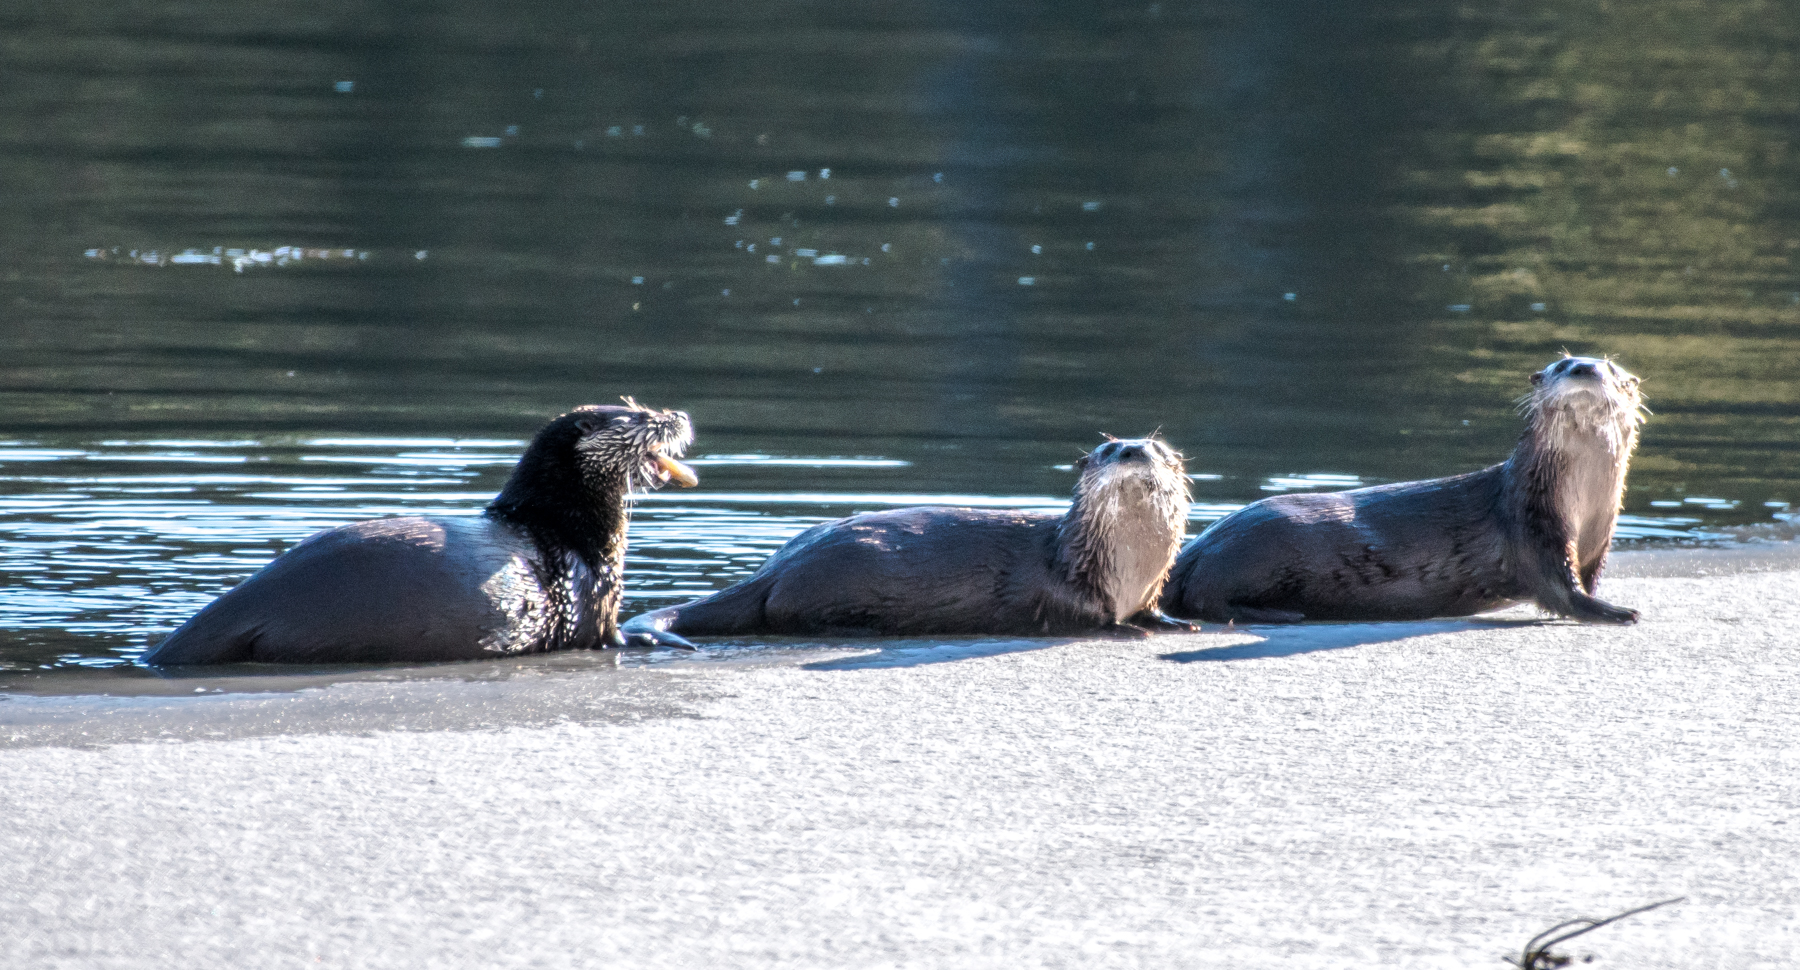 I stumbled upon 3 more otters out fishing and playing this morning.